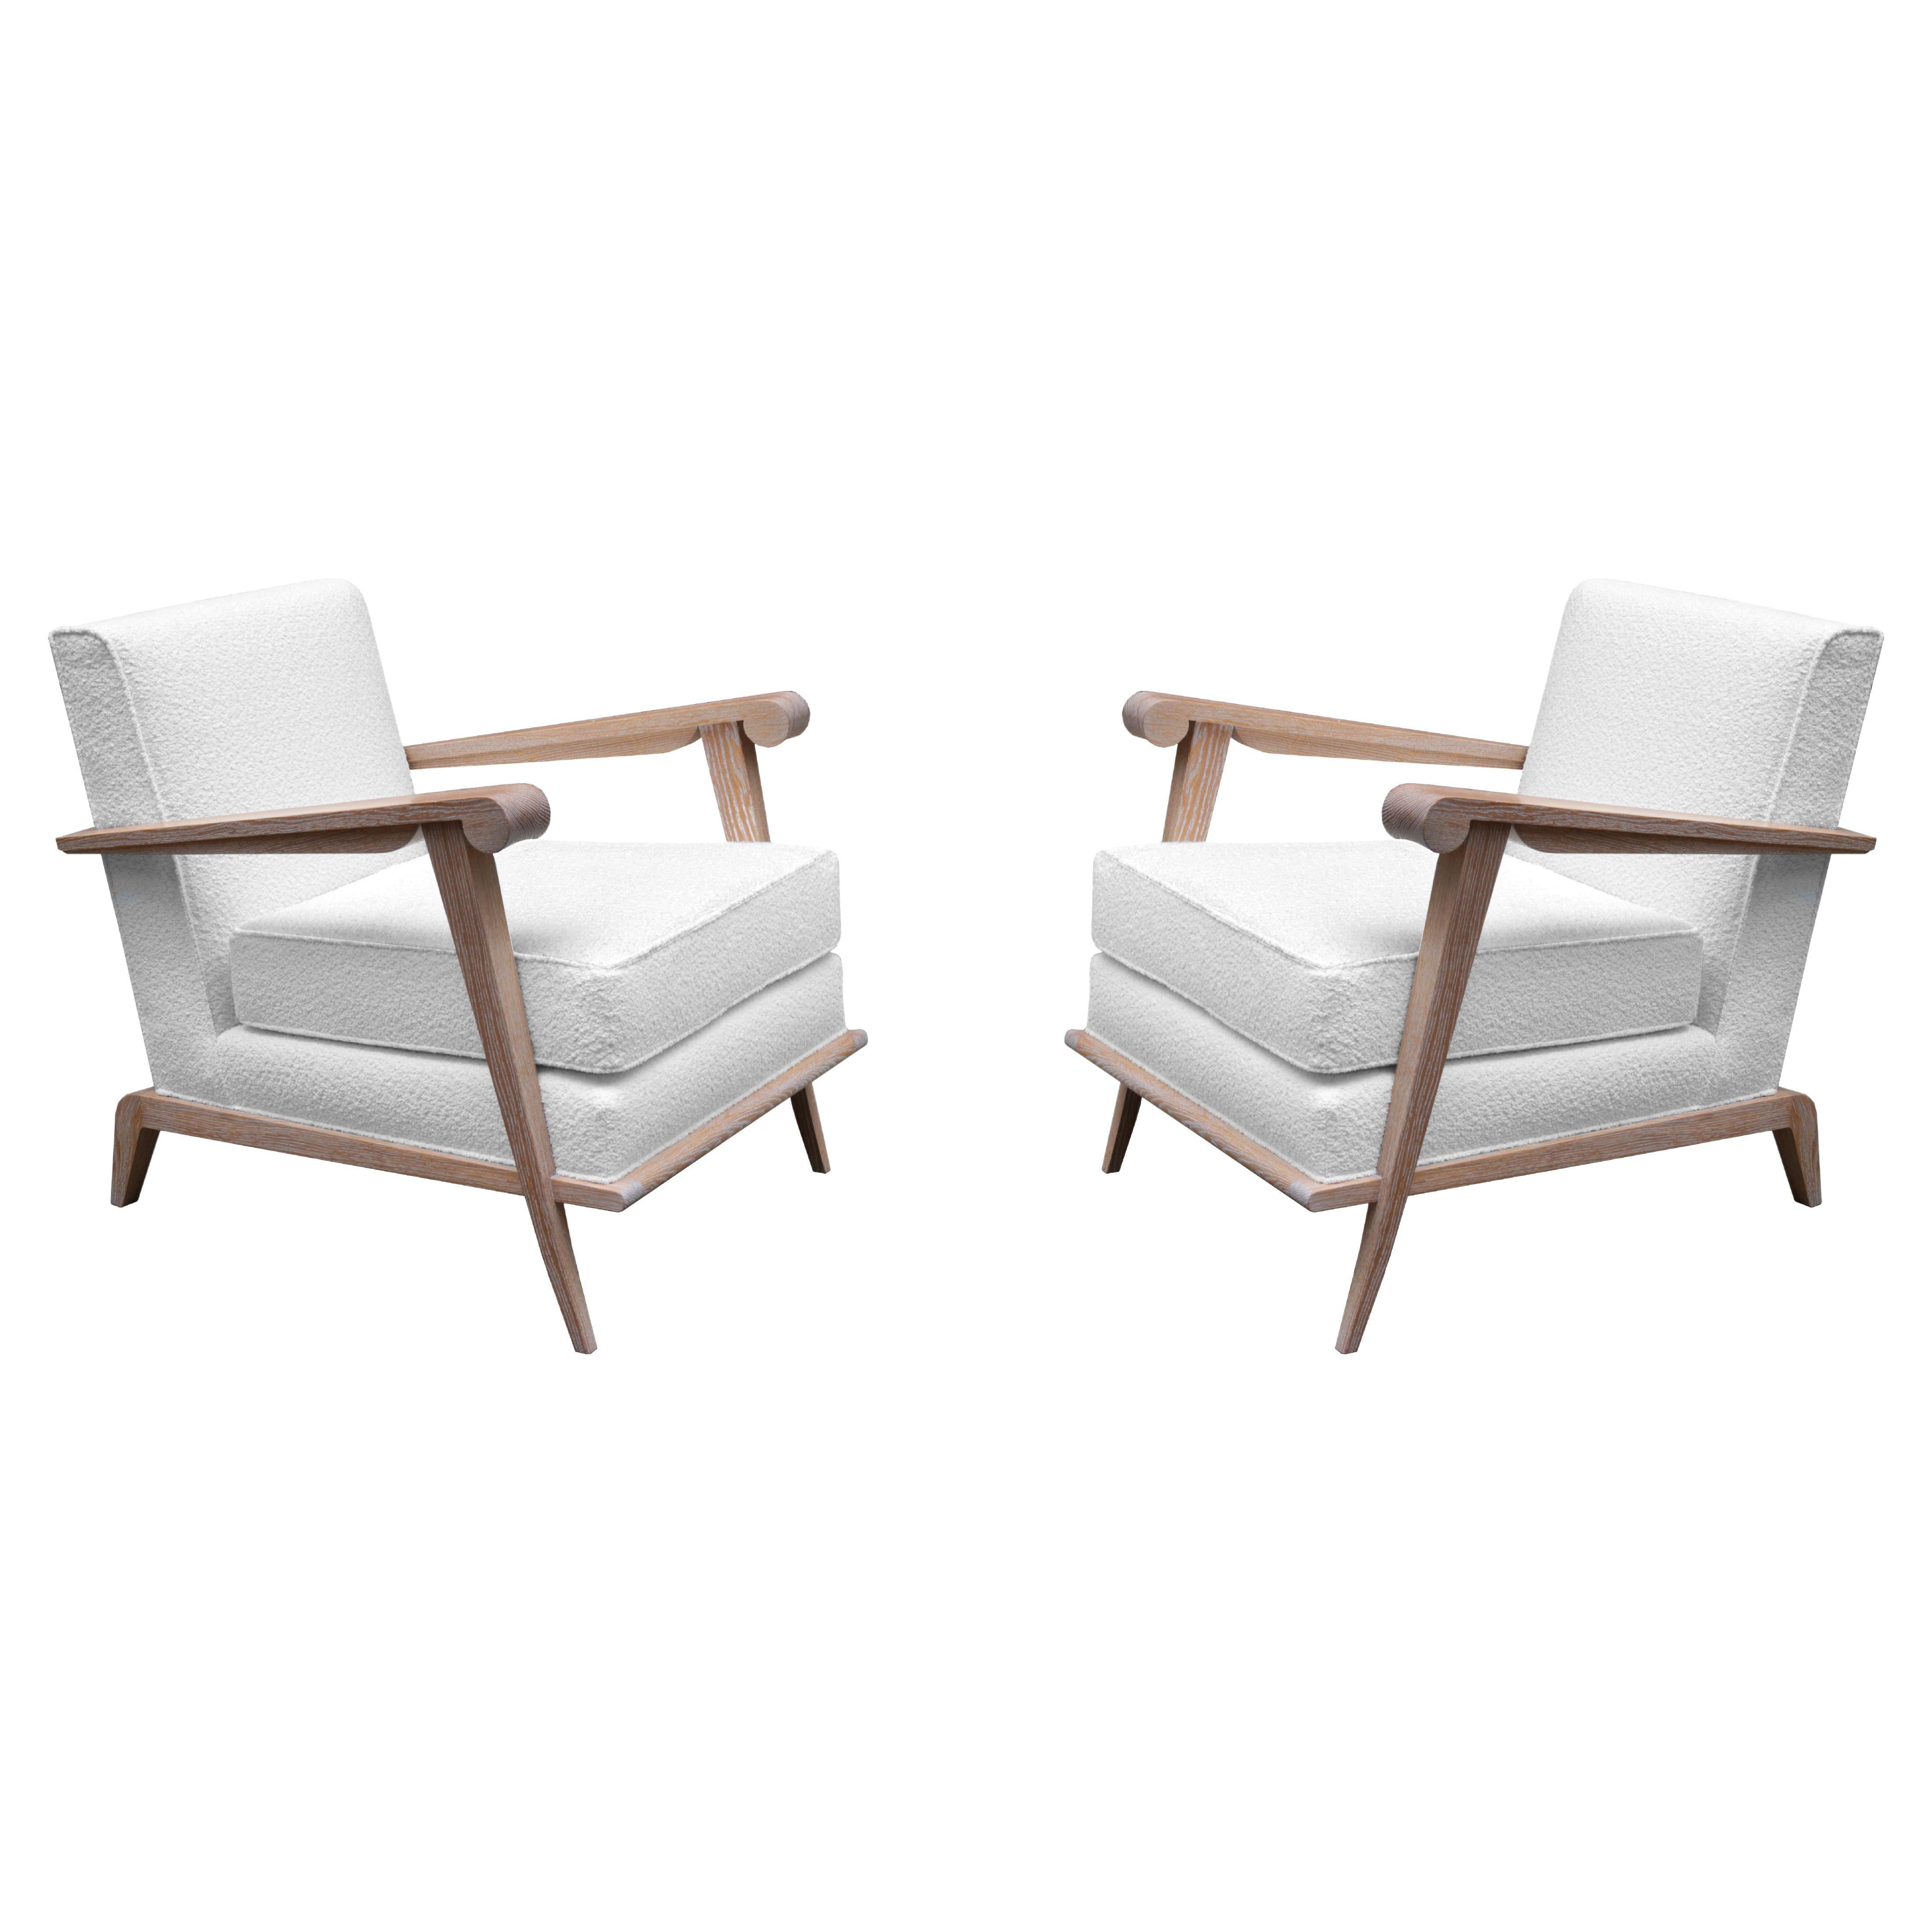 A Pair of Contemporary French Modernist Style Armchairs  For Sale